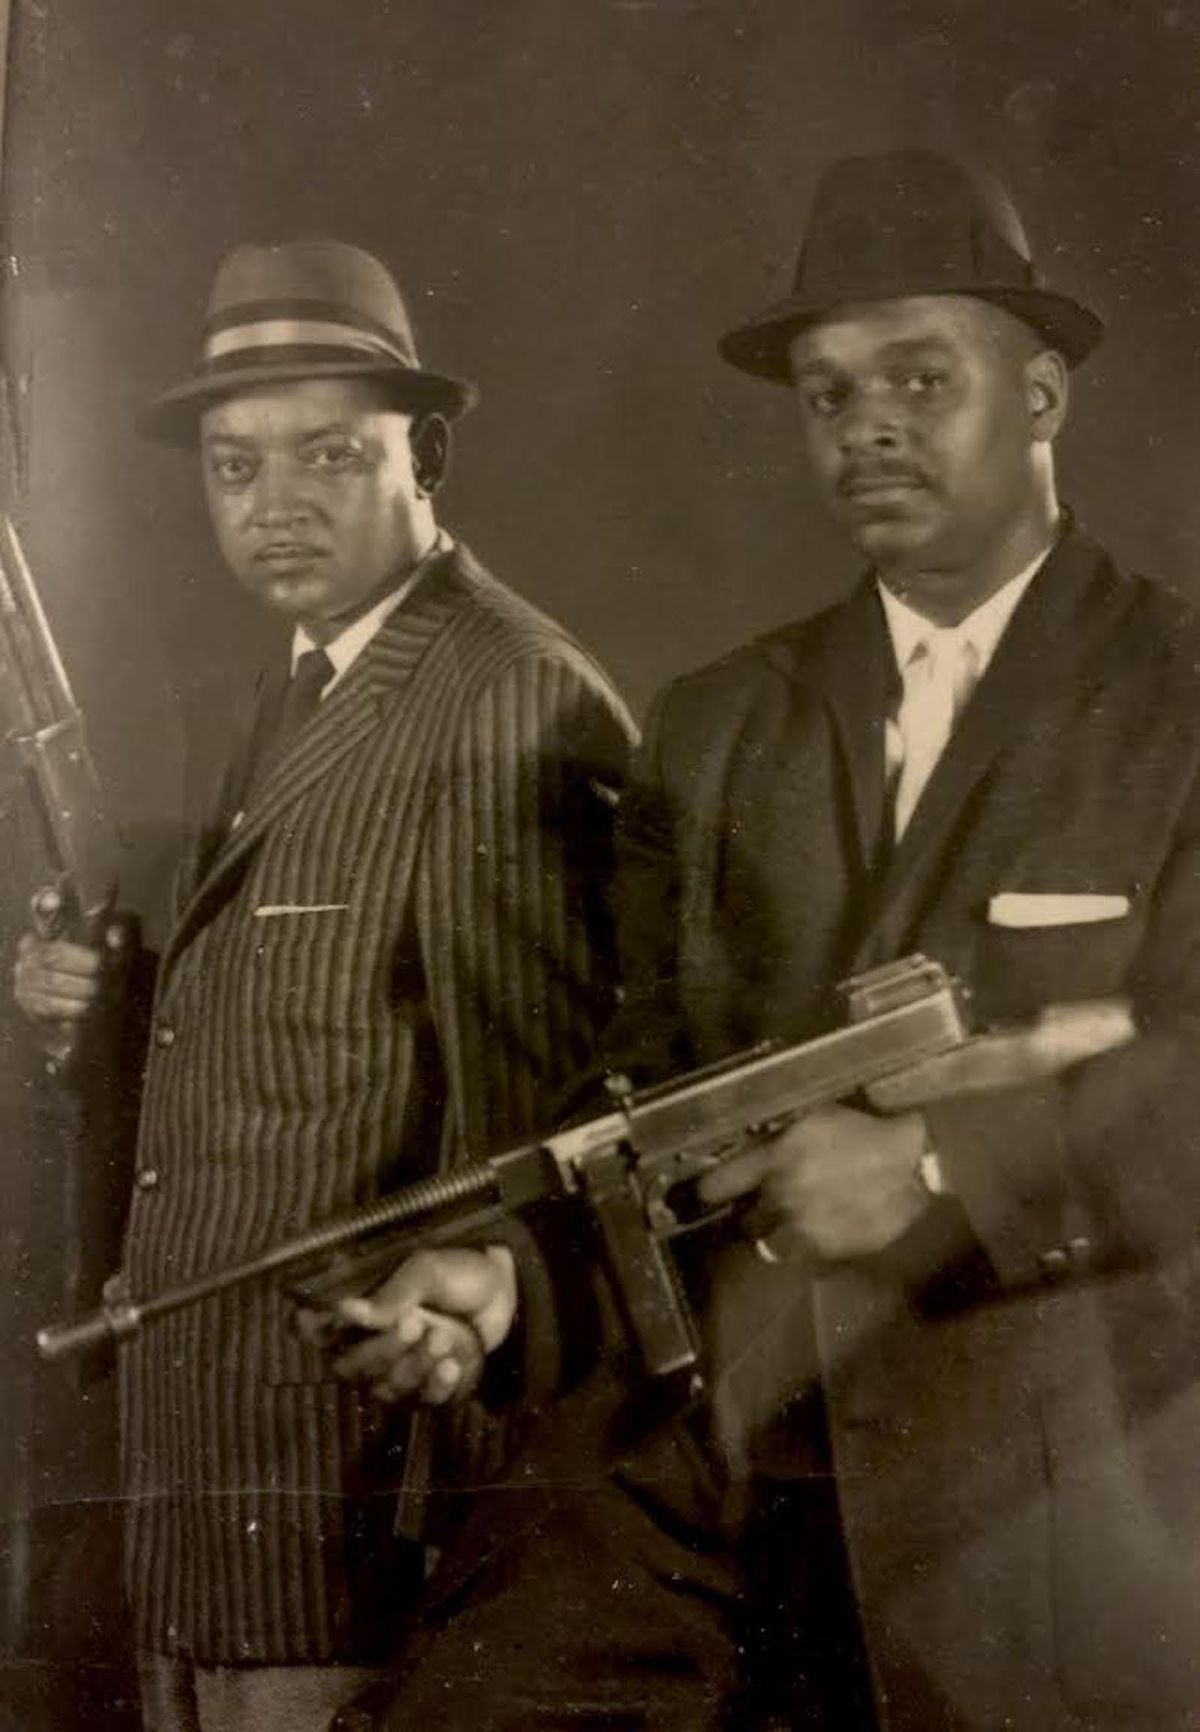 Detective Clarence Burke Jr. (right) and his partner Luceke “Zeke” Mays were credited with solving many crimes when they worked at the Chicago Police Department. “That’s how they always looked — sharp and ready,” said Mr. Burke’s son Keni.